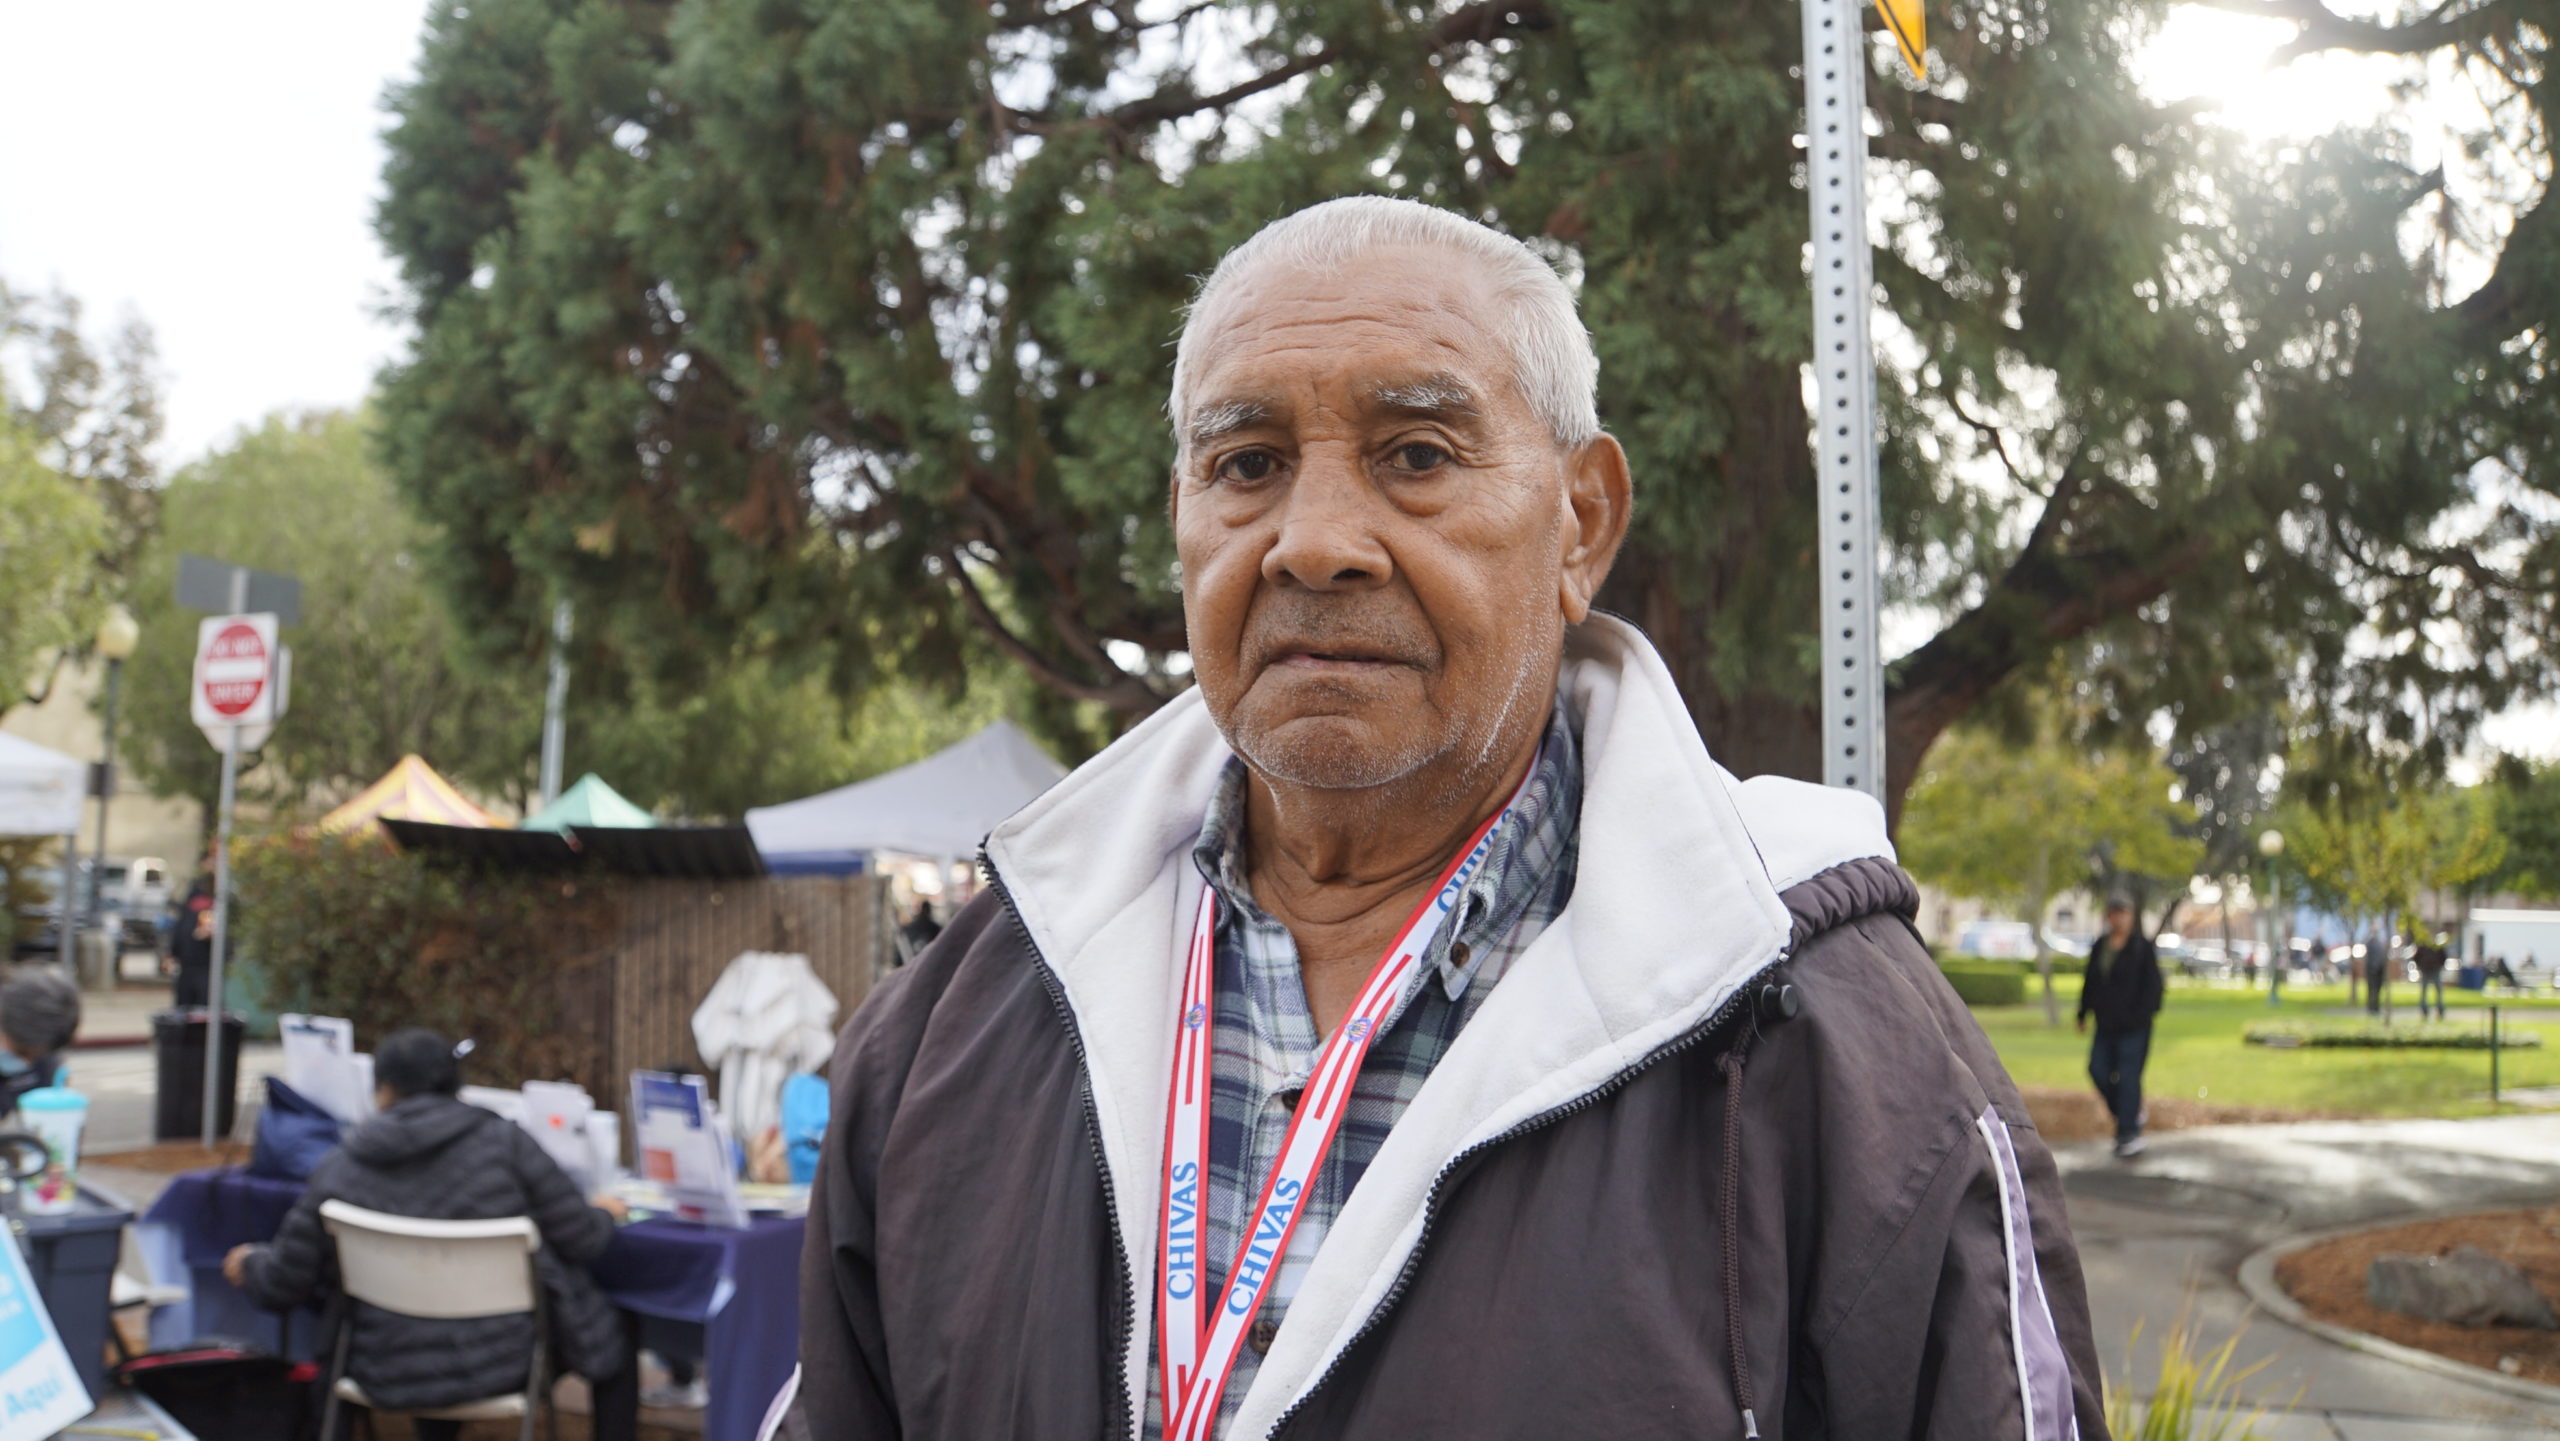 Jesus Fuentes, a District 2 resident in Watsonville at the Watsonville Farmers Market